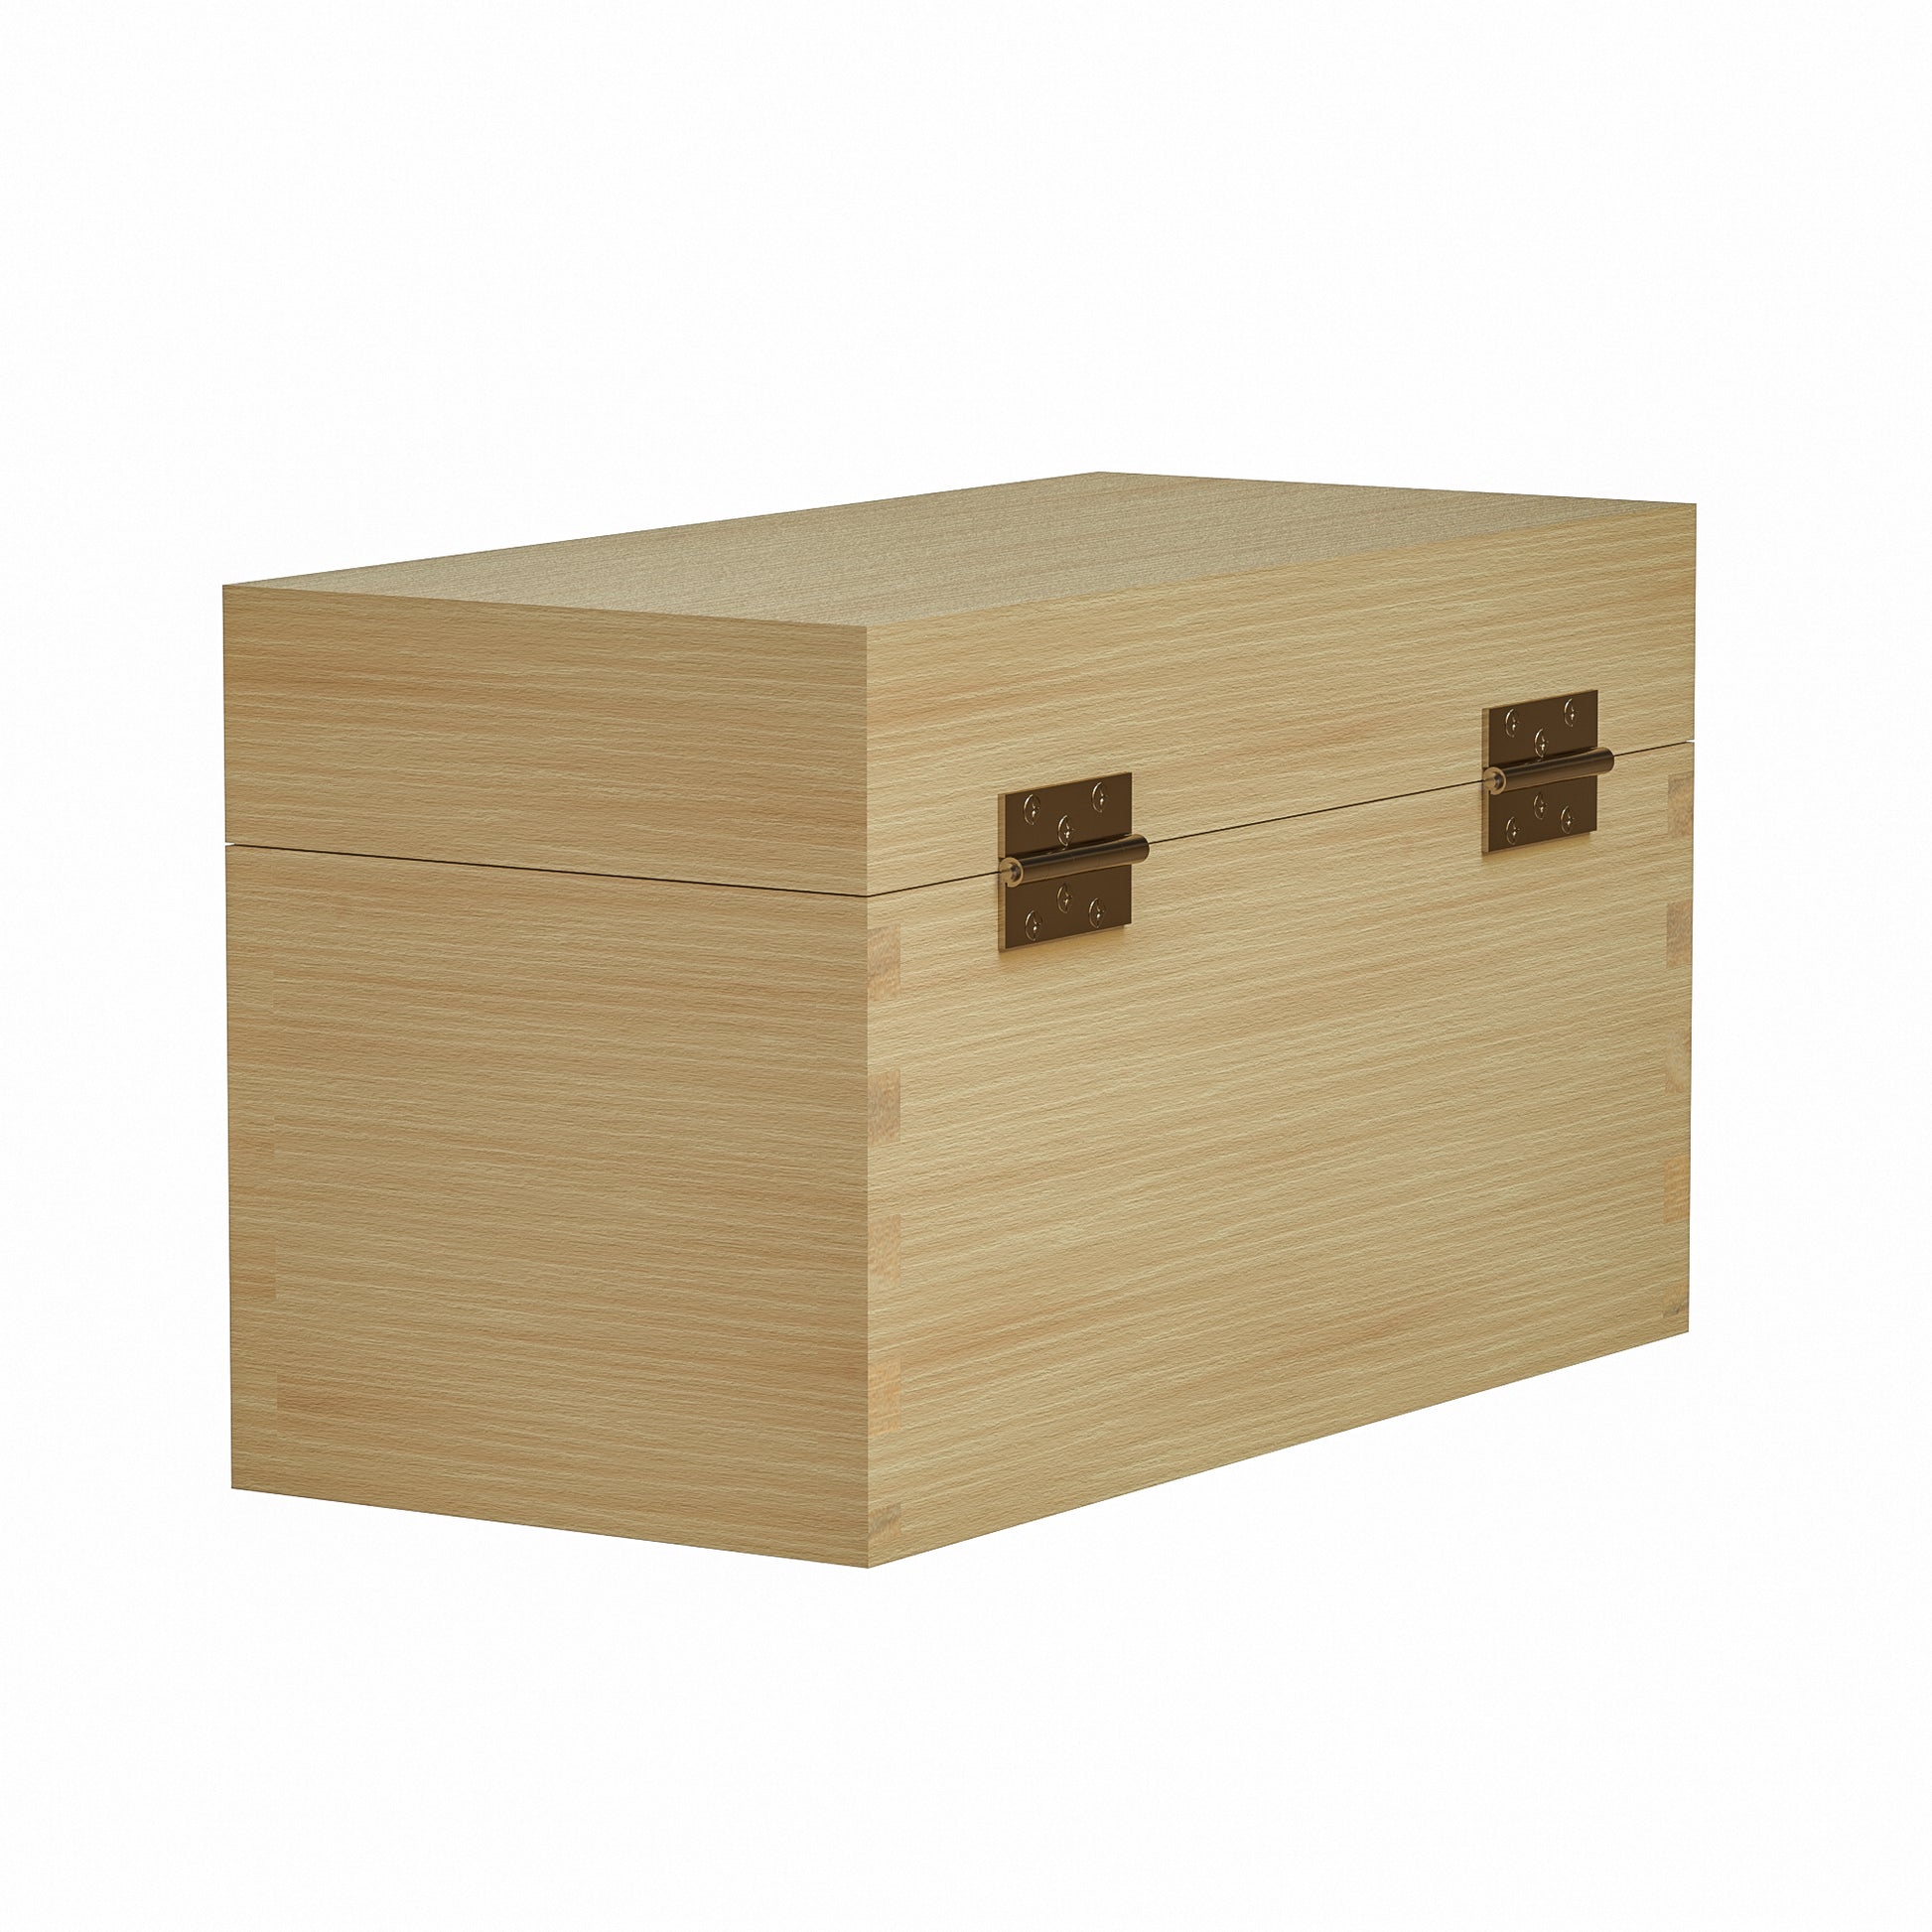 Wooden Storage Box with 5 compartments for Storing Gold Acid Tetsting Kit  with Test Stone and Test Needles